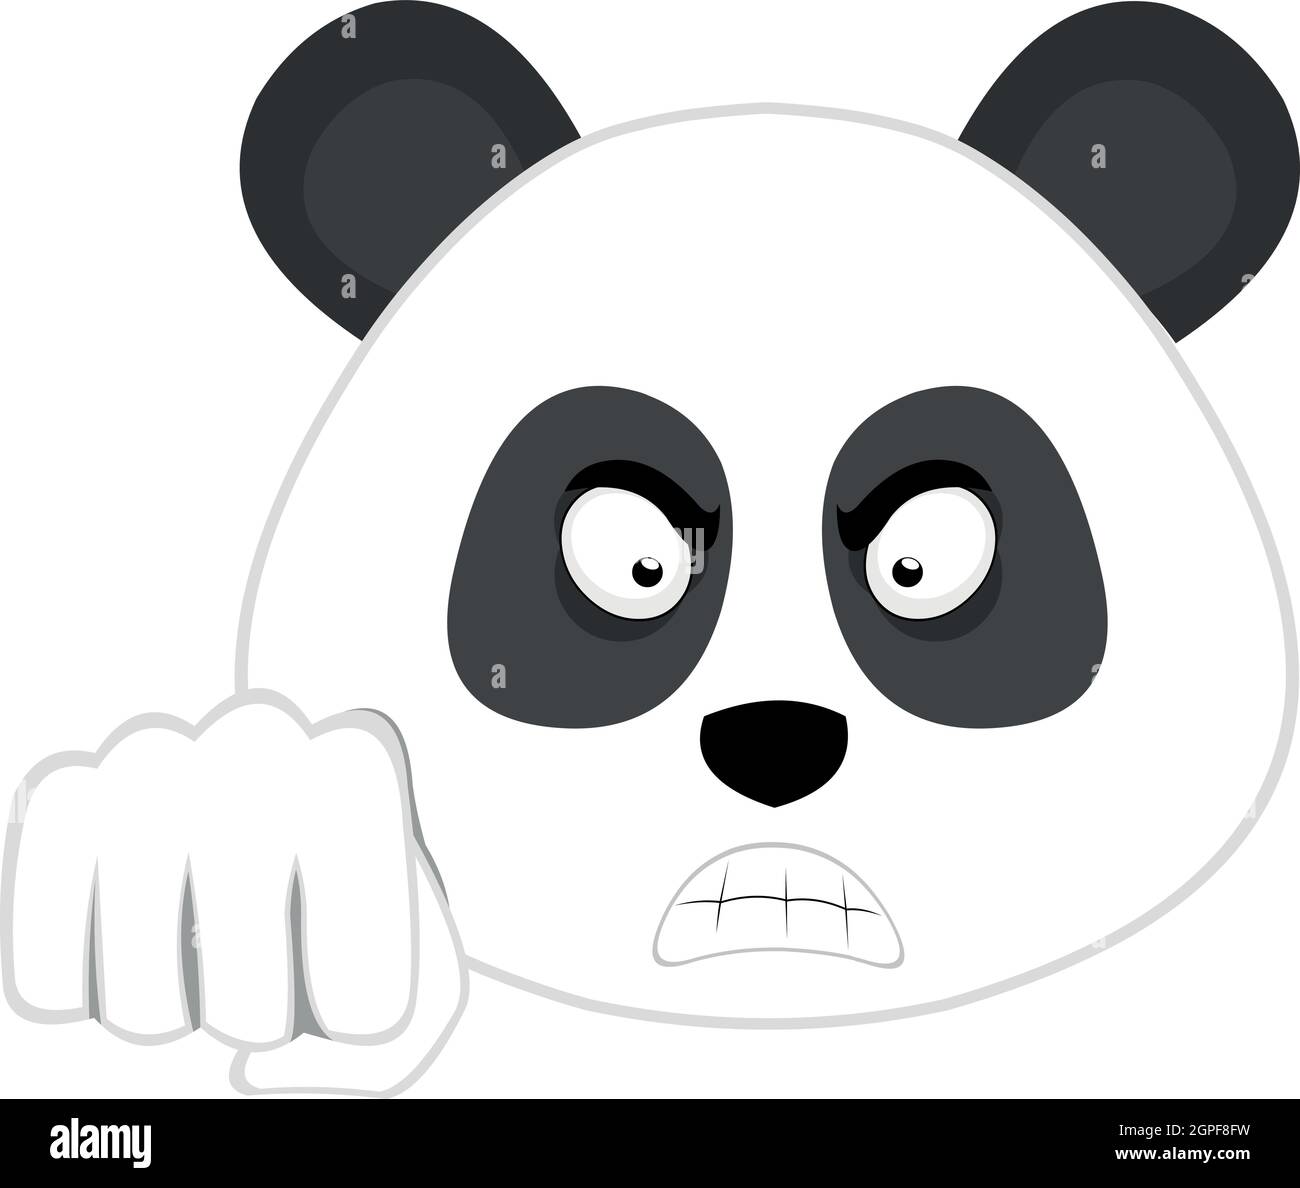 Vector emoticon illustration of the face of a cartoon panda bear with an angry expression and giving a fist bump Stock Vector